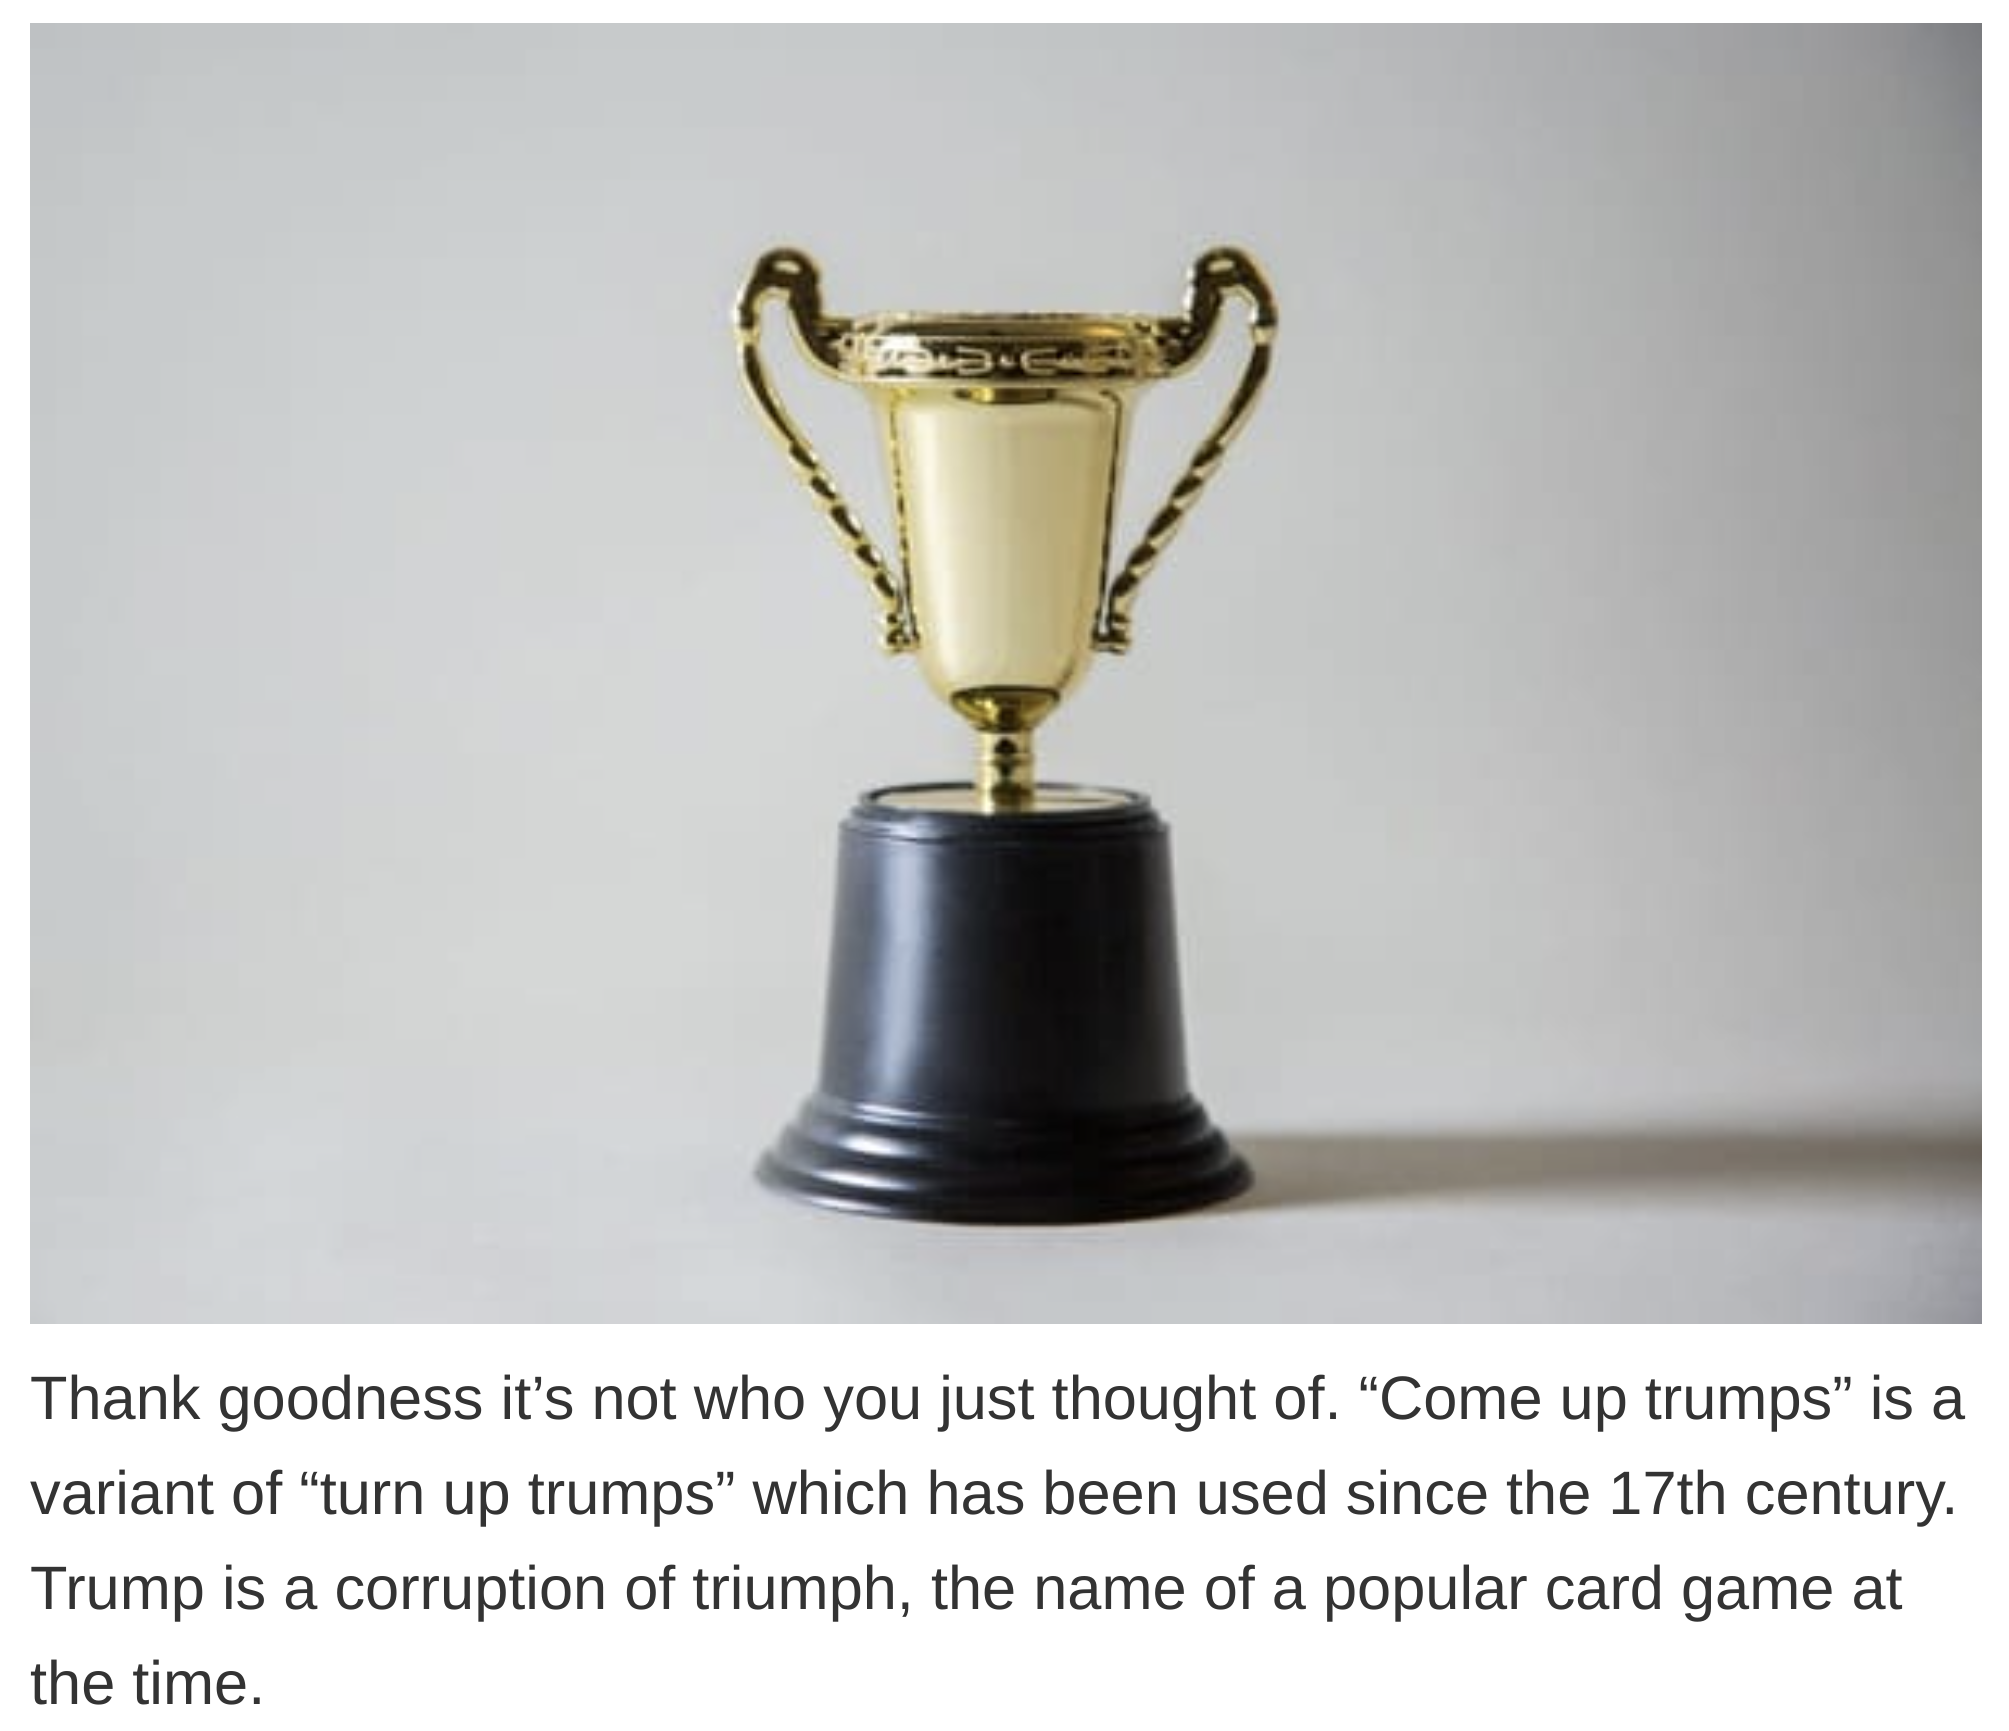 etymology english language - trophy - Thank goodness it's not who you just thought of.